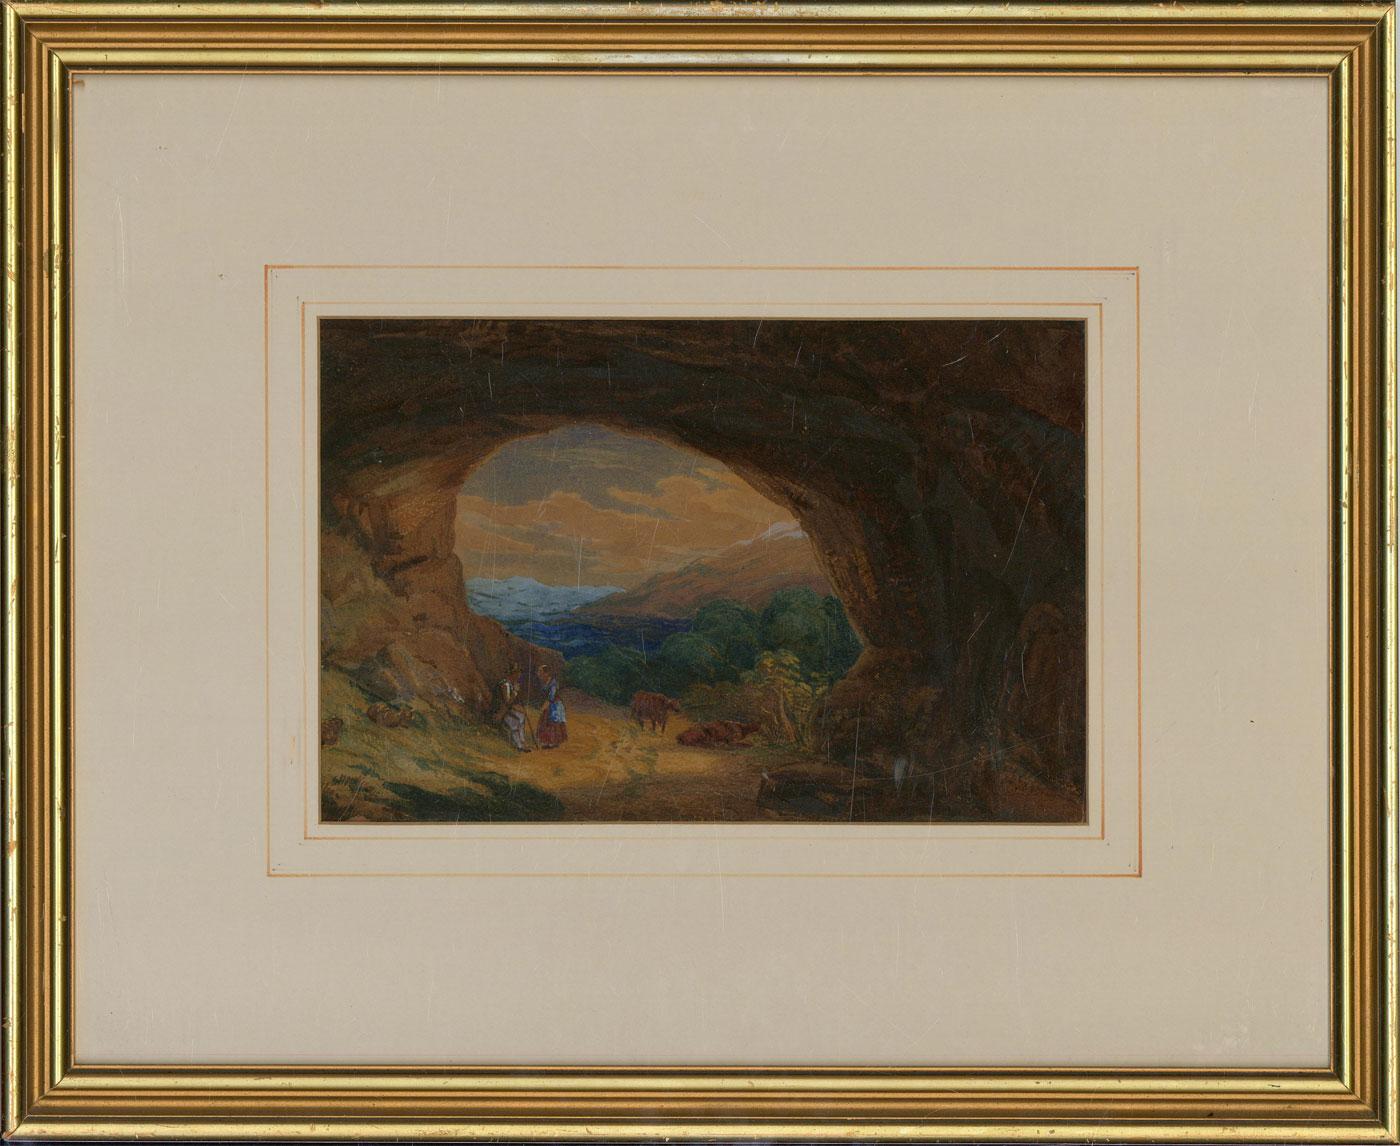 A charming watercolour painting with gouache and gum arabic details, depicting a landscape scene with two figures and livestock in a cave. Well-presented in a washline card mount and in a gilt effect frame. On watercolour paper.
